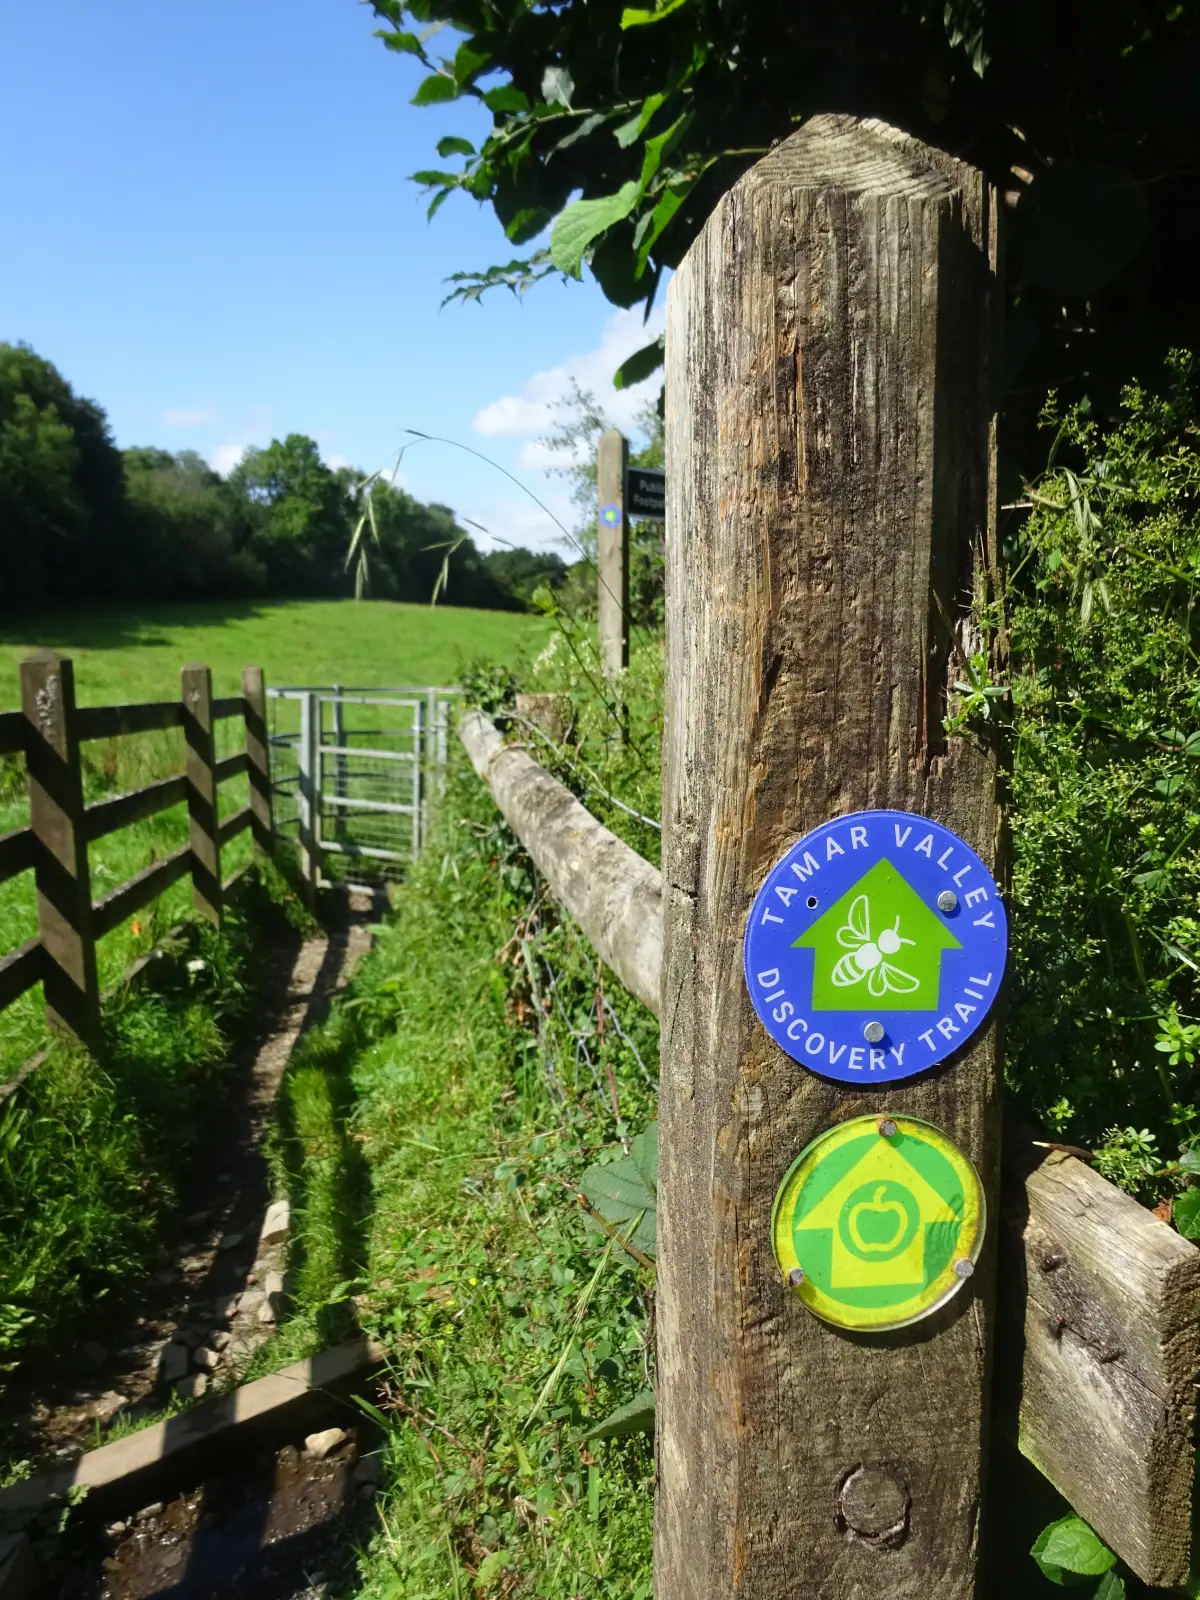 The Tamar Valley Discovery Trail is followed for two thirds of the route